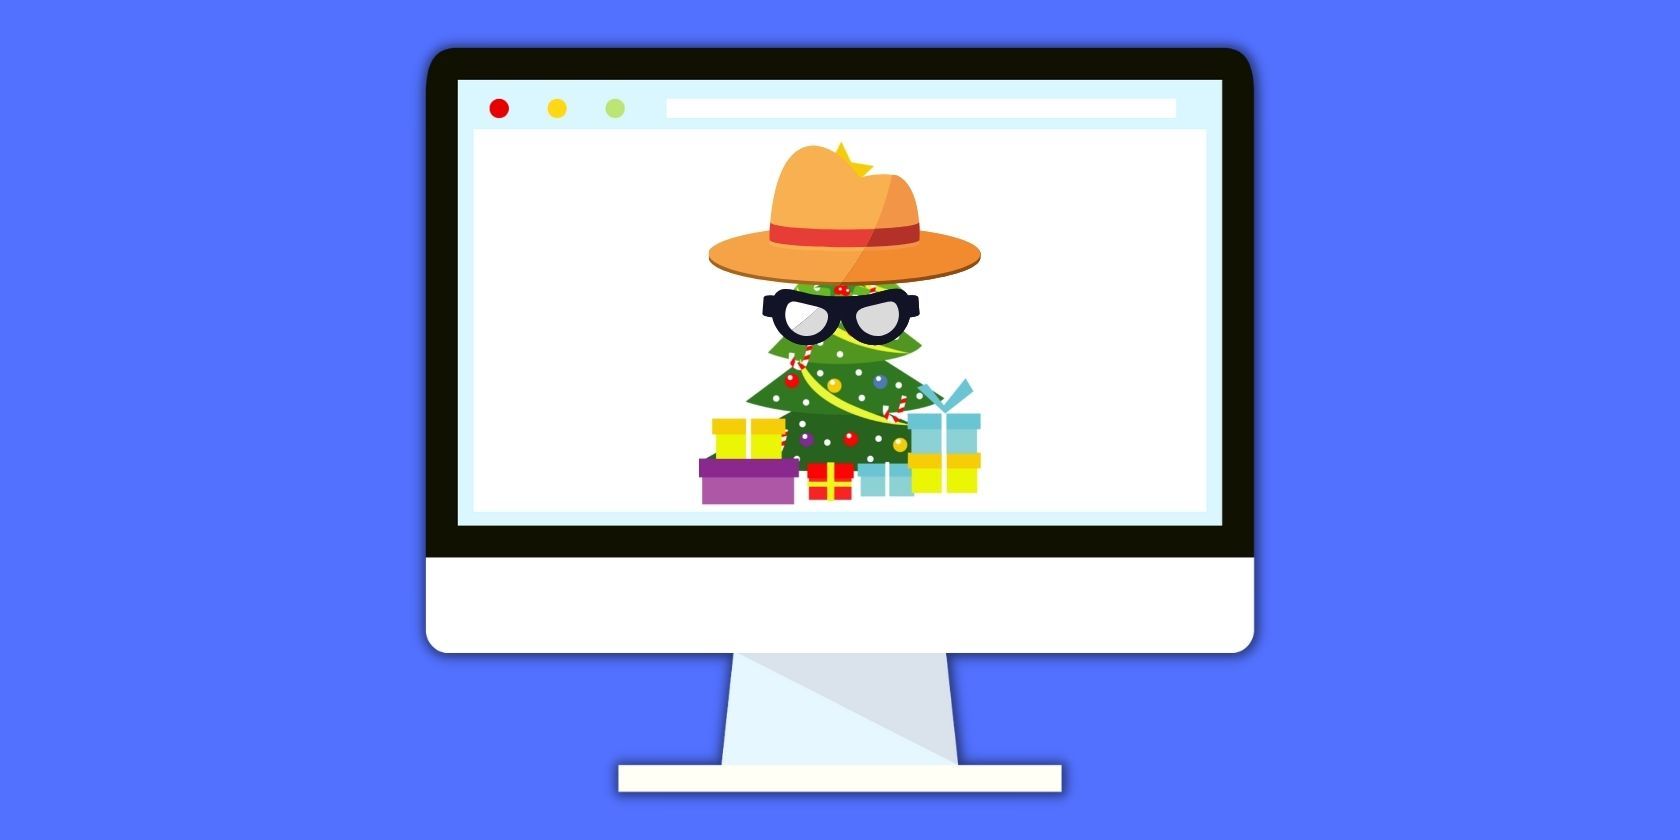 A Christmas tree is seen on a computer screen